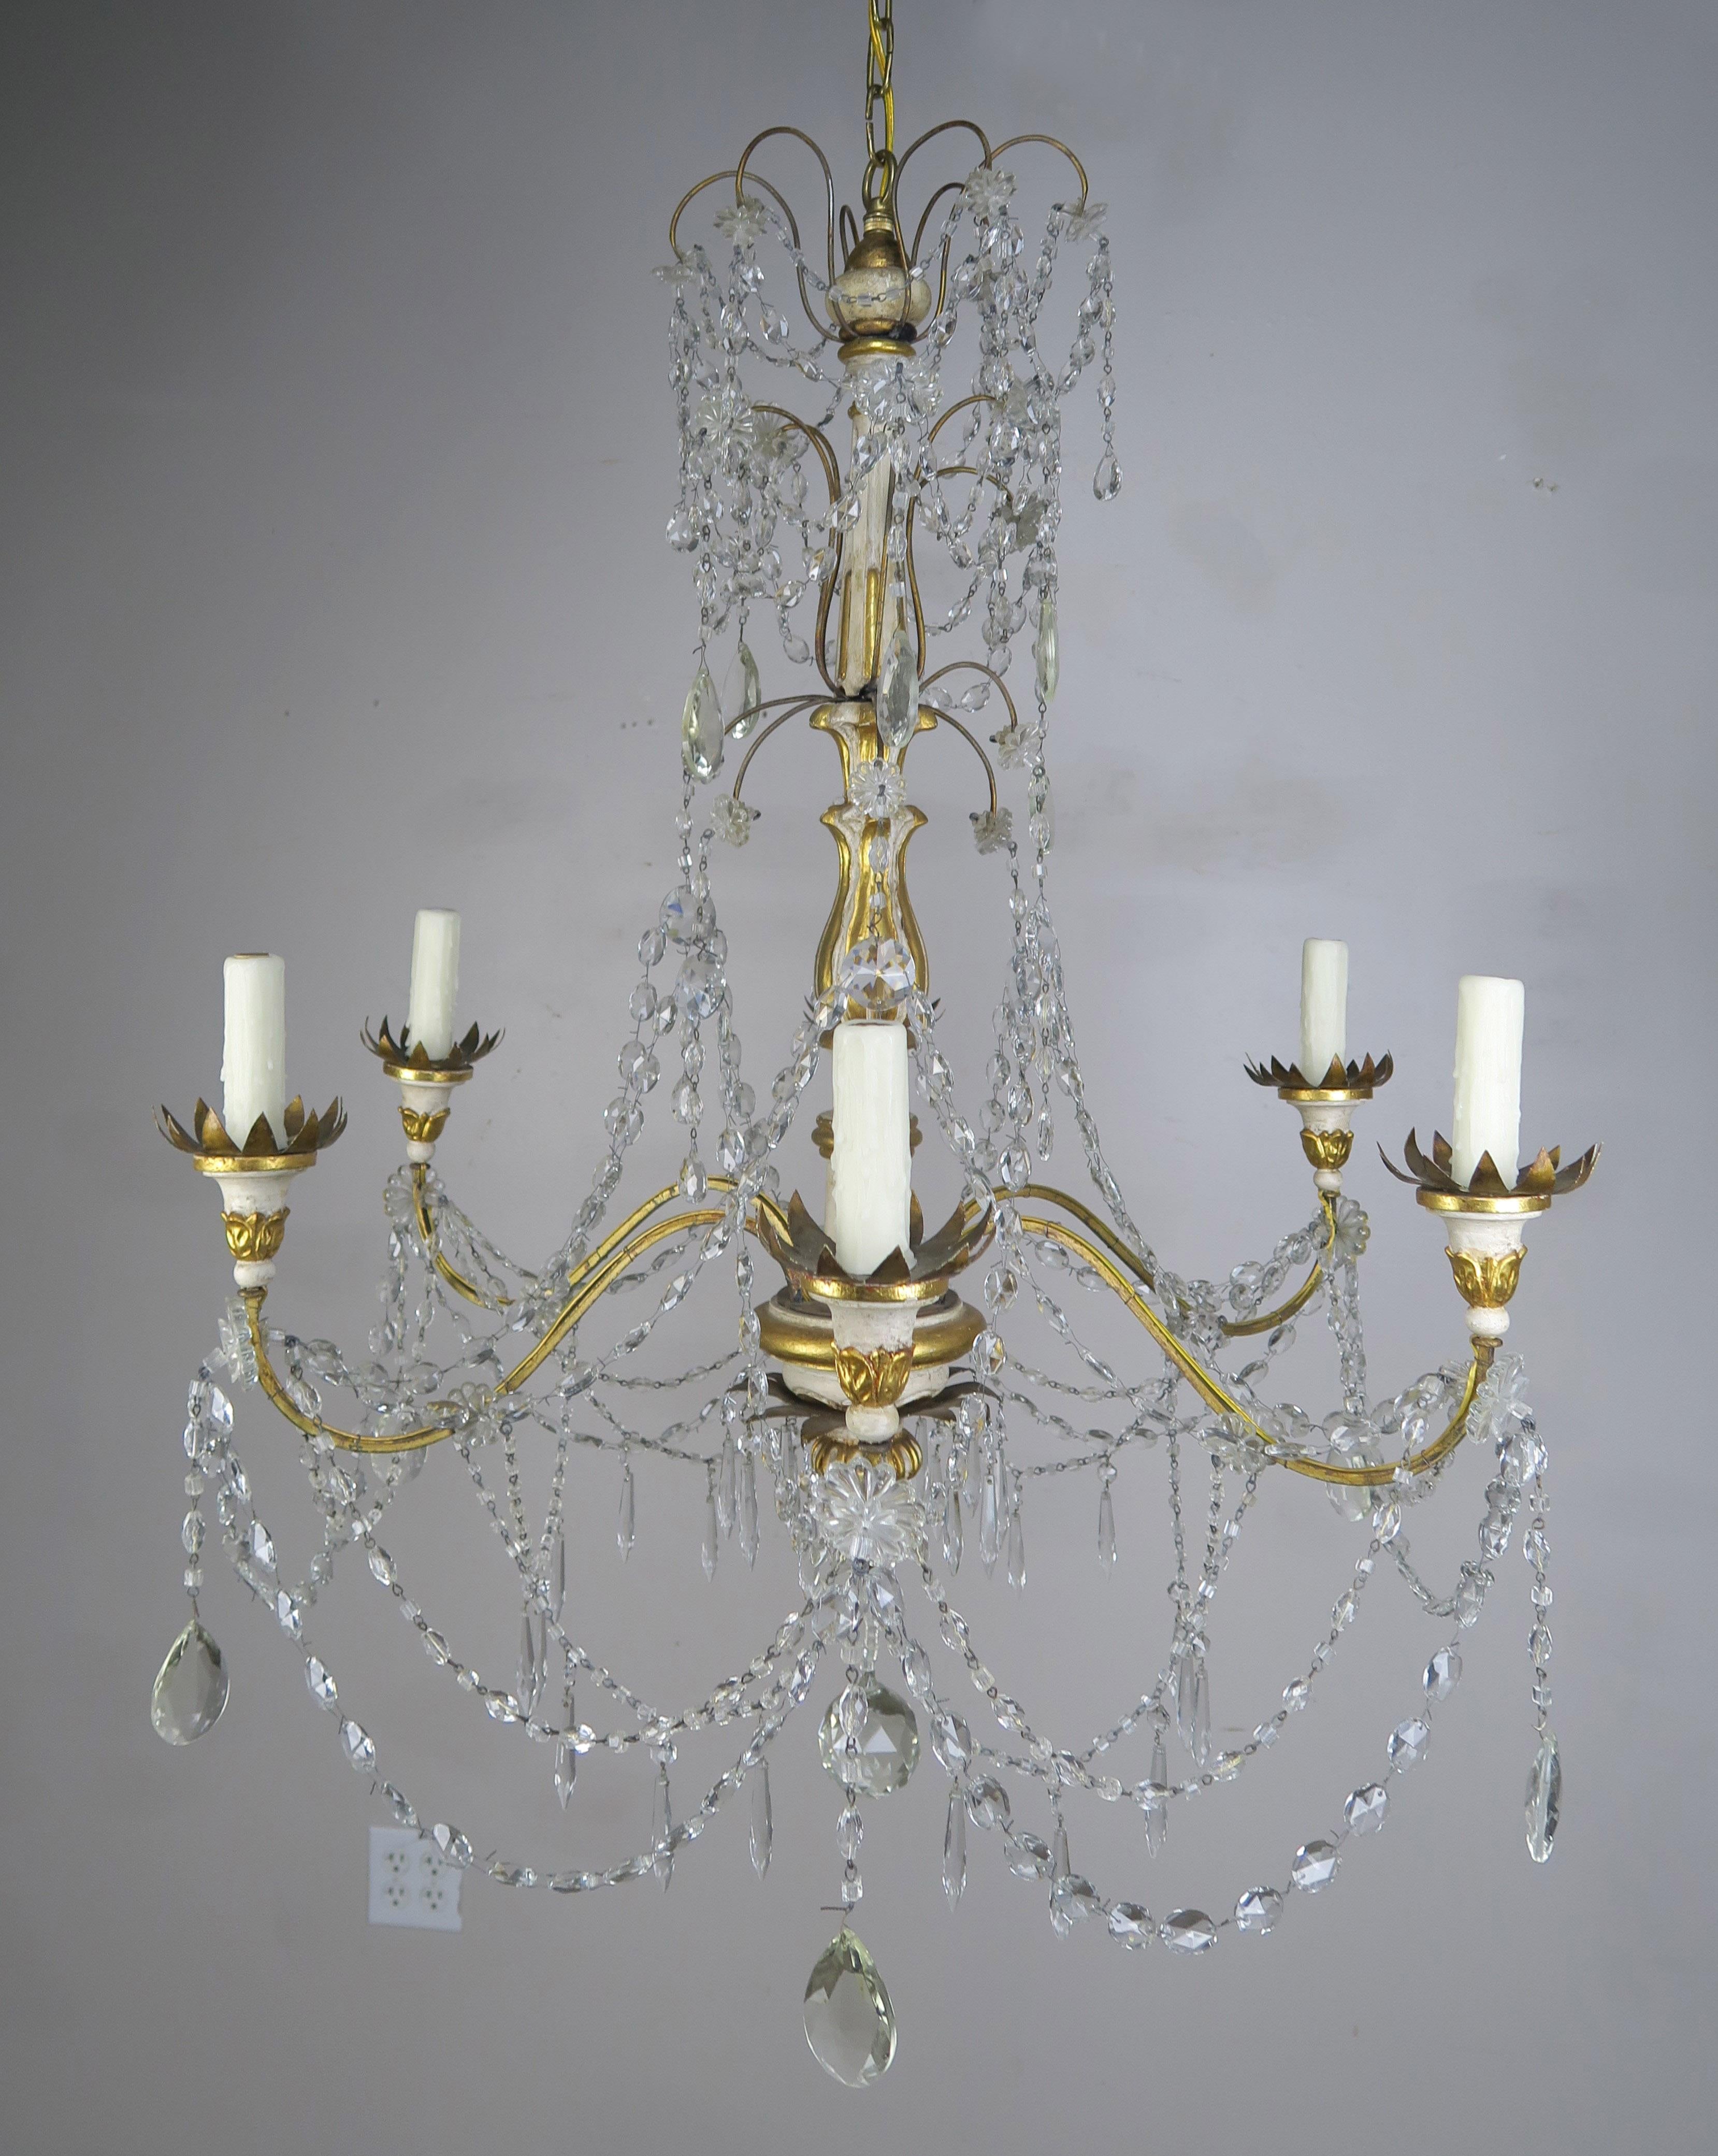 Italian Geneviere style six light painted & parcel gilt crystal chandelier with wrought iron flower shaped bobeches. The fixture is newly rewired with cream colored drip wax candle covers.